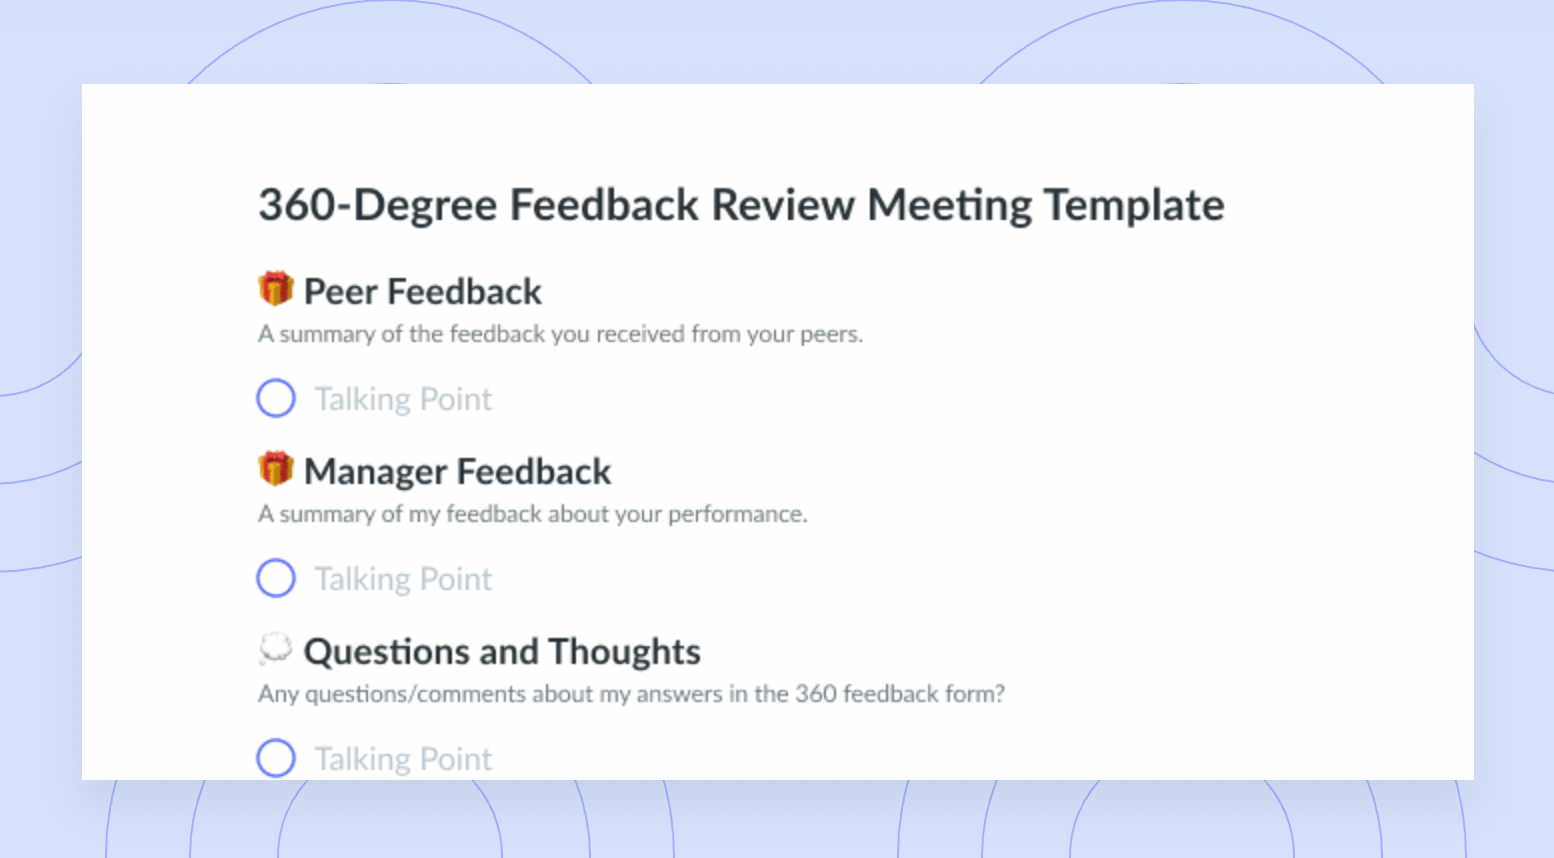 360-Degree Feedback Review Meeting Template